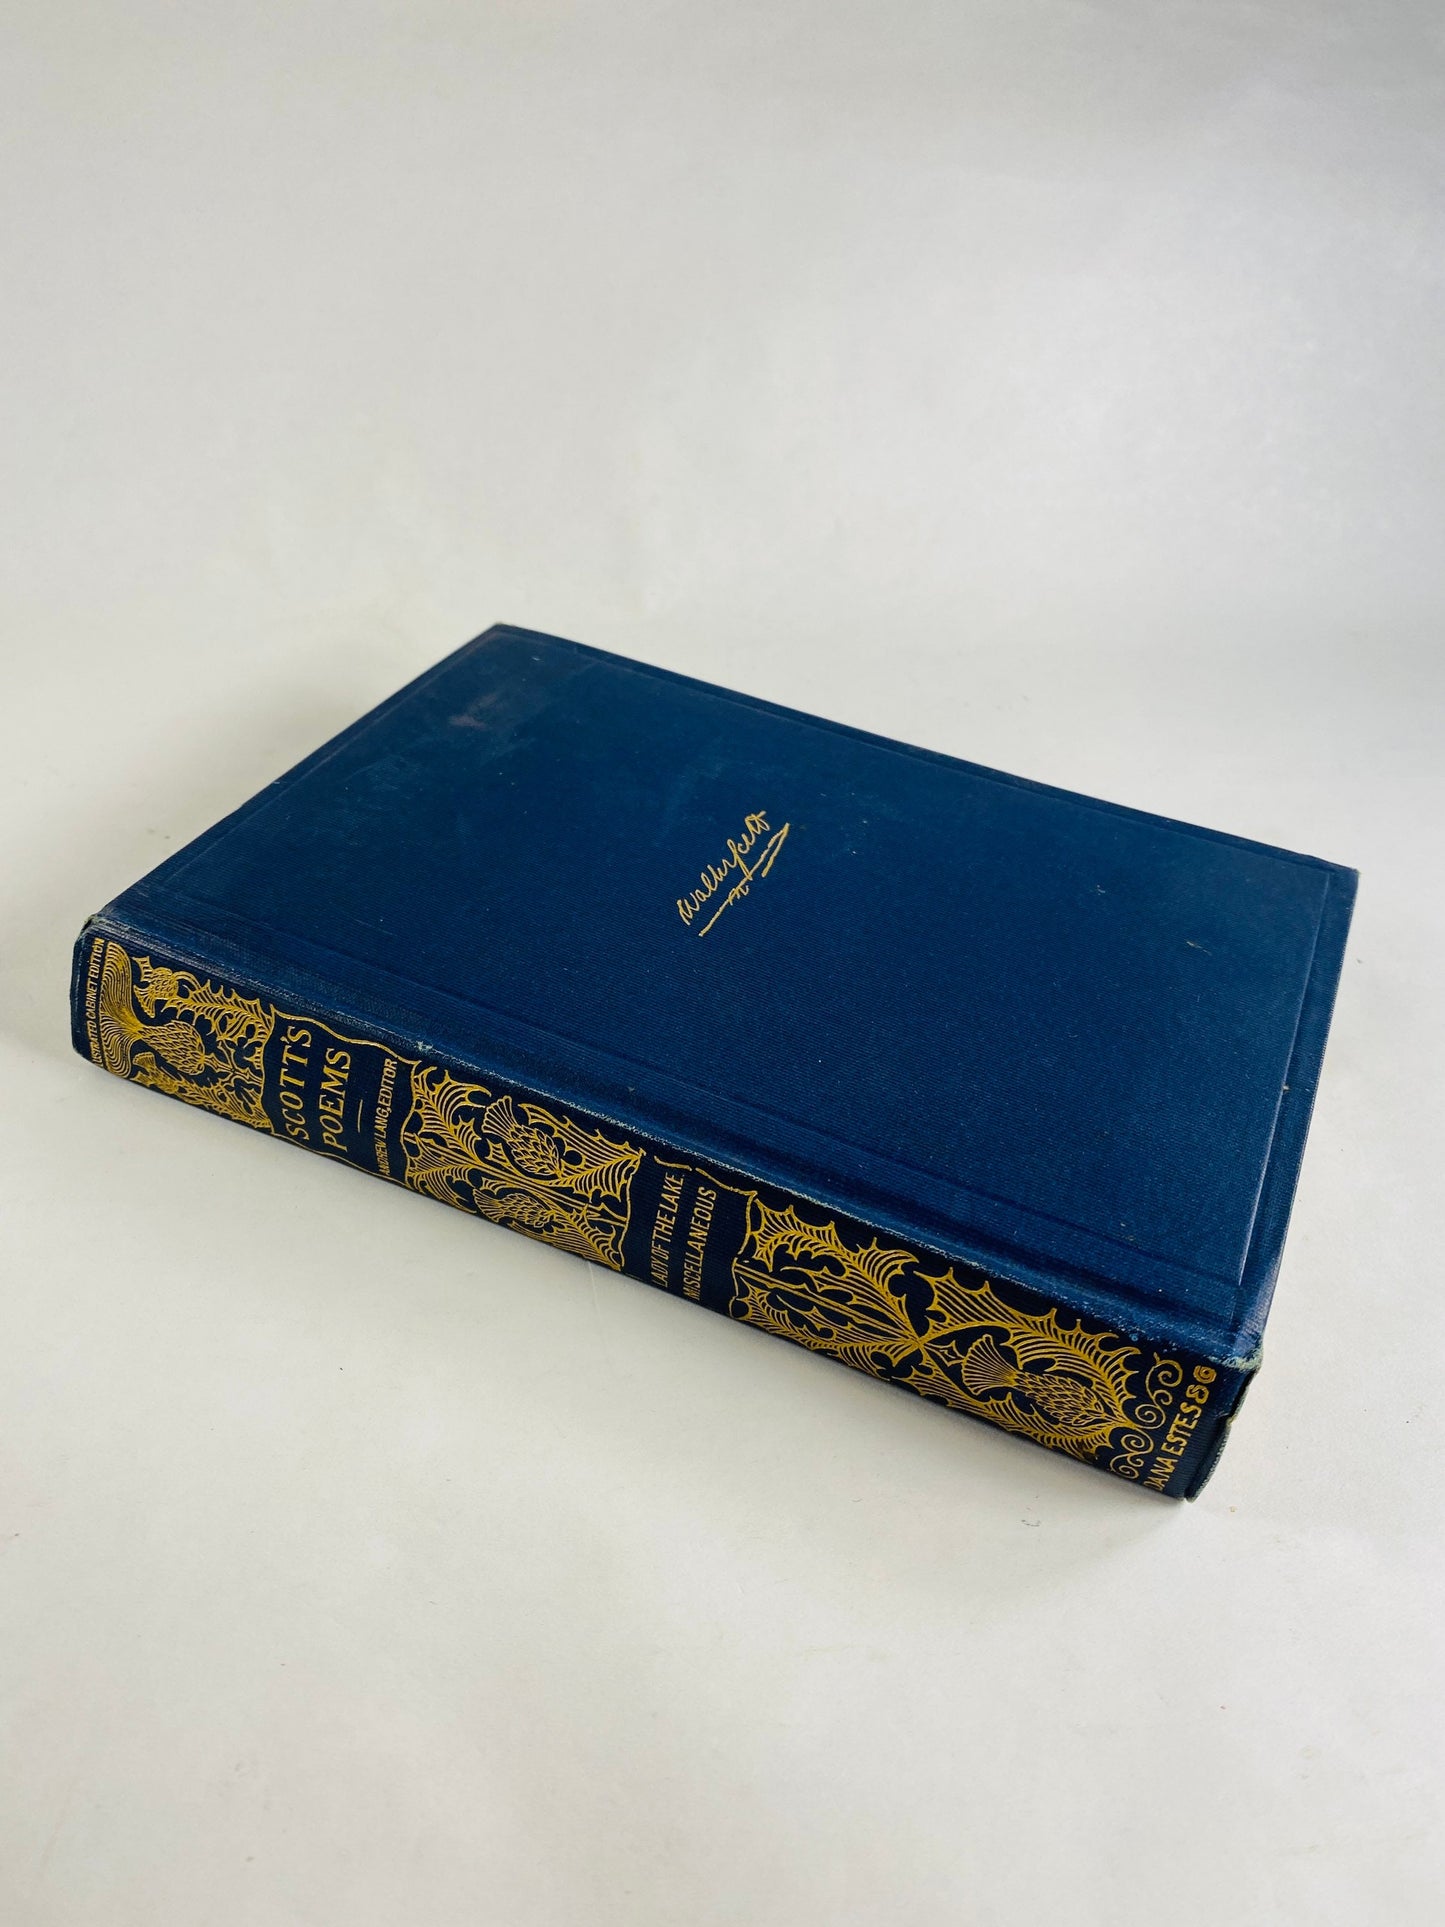 1900 Poetical Works of Sir Walter Scott Vintage blue book gilt tooling. Lady of the Lake Lay of Last Minstrel